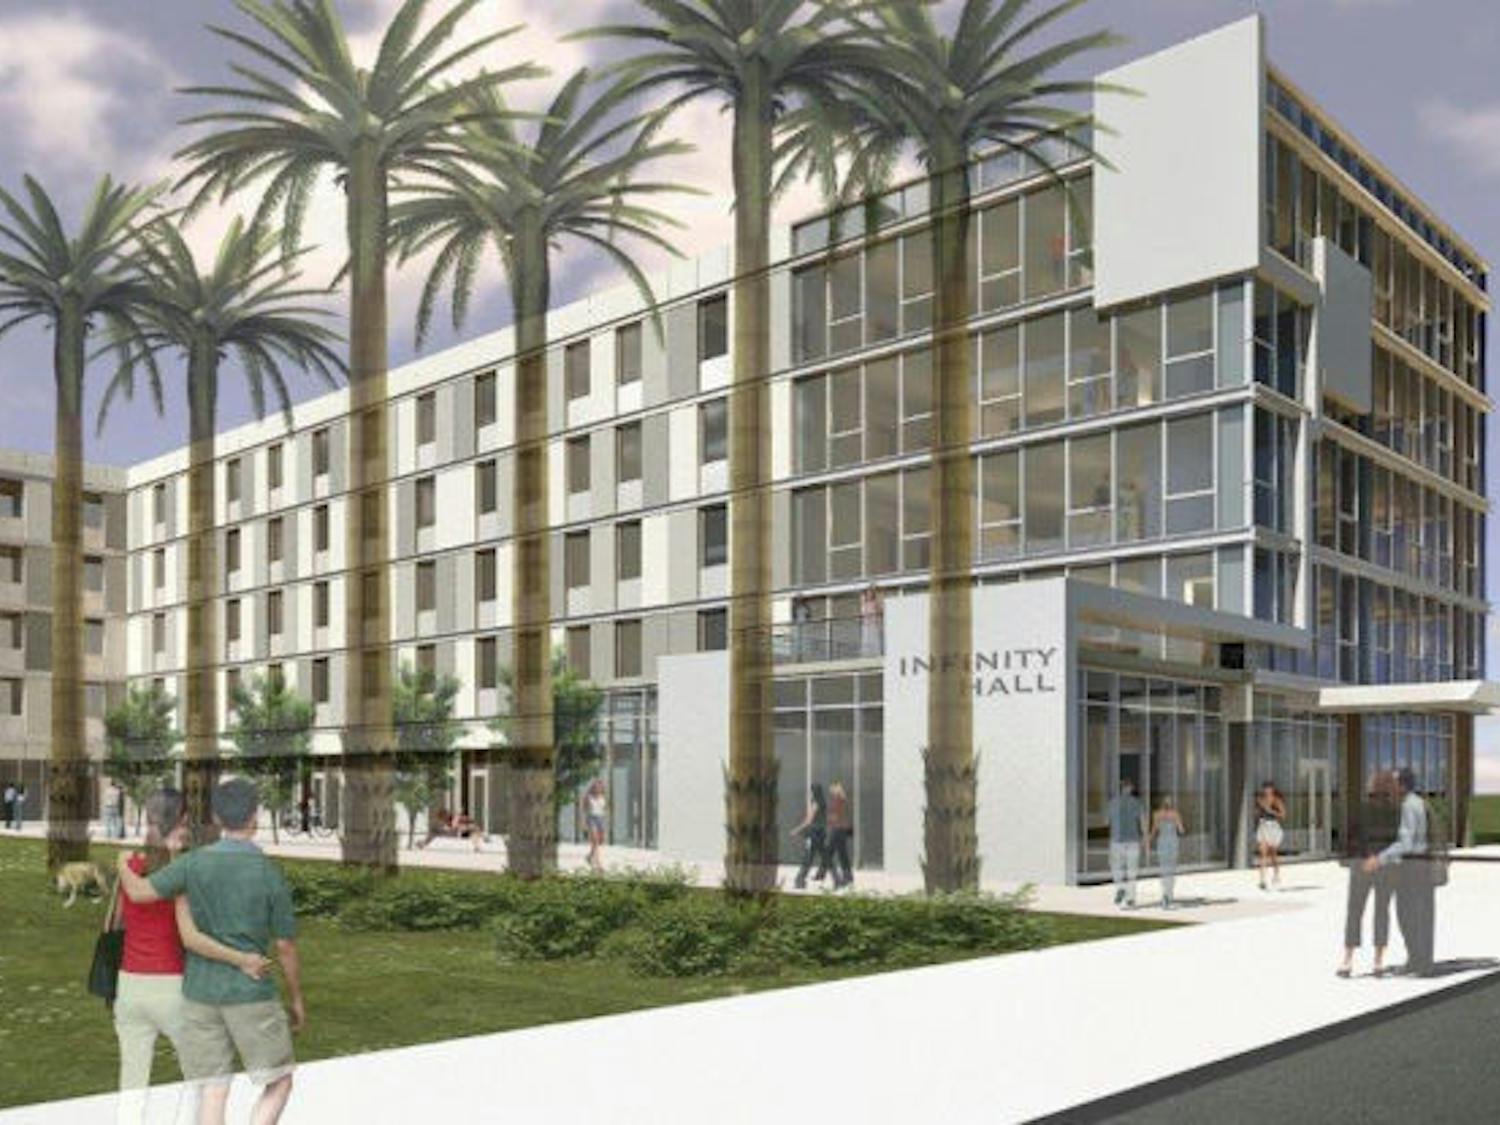 An artist’s rendering displays a new residence hall for UF students scheduled for completion in 2015. The dorm will be tailored to entrepreneurial students.